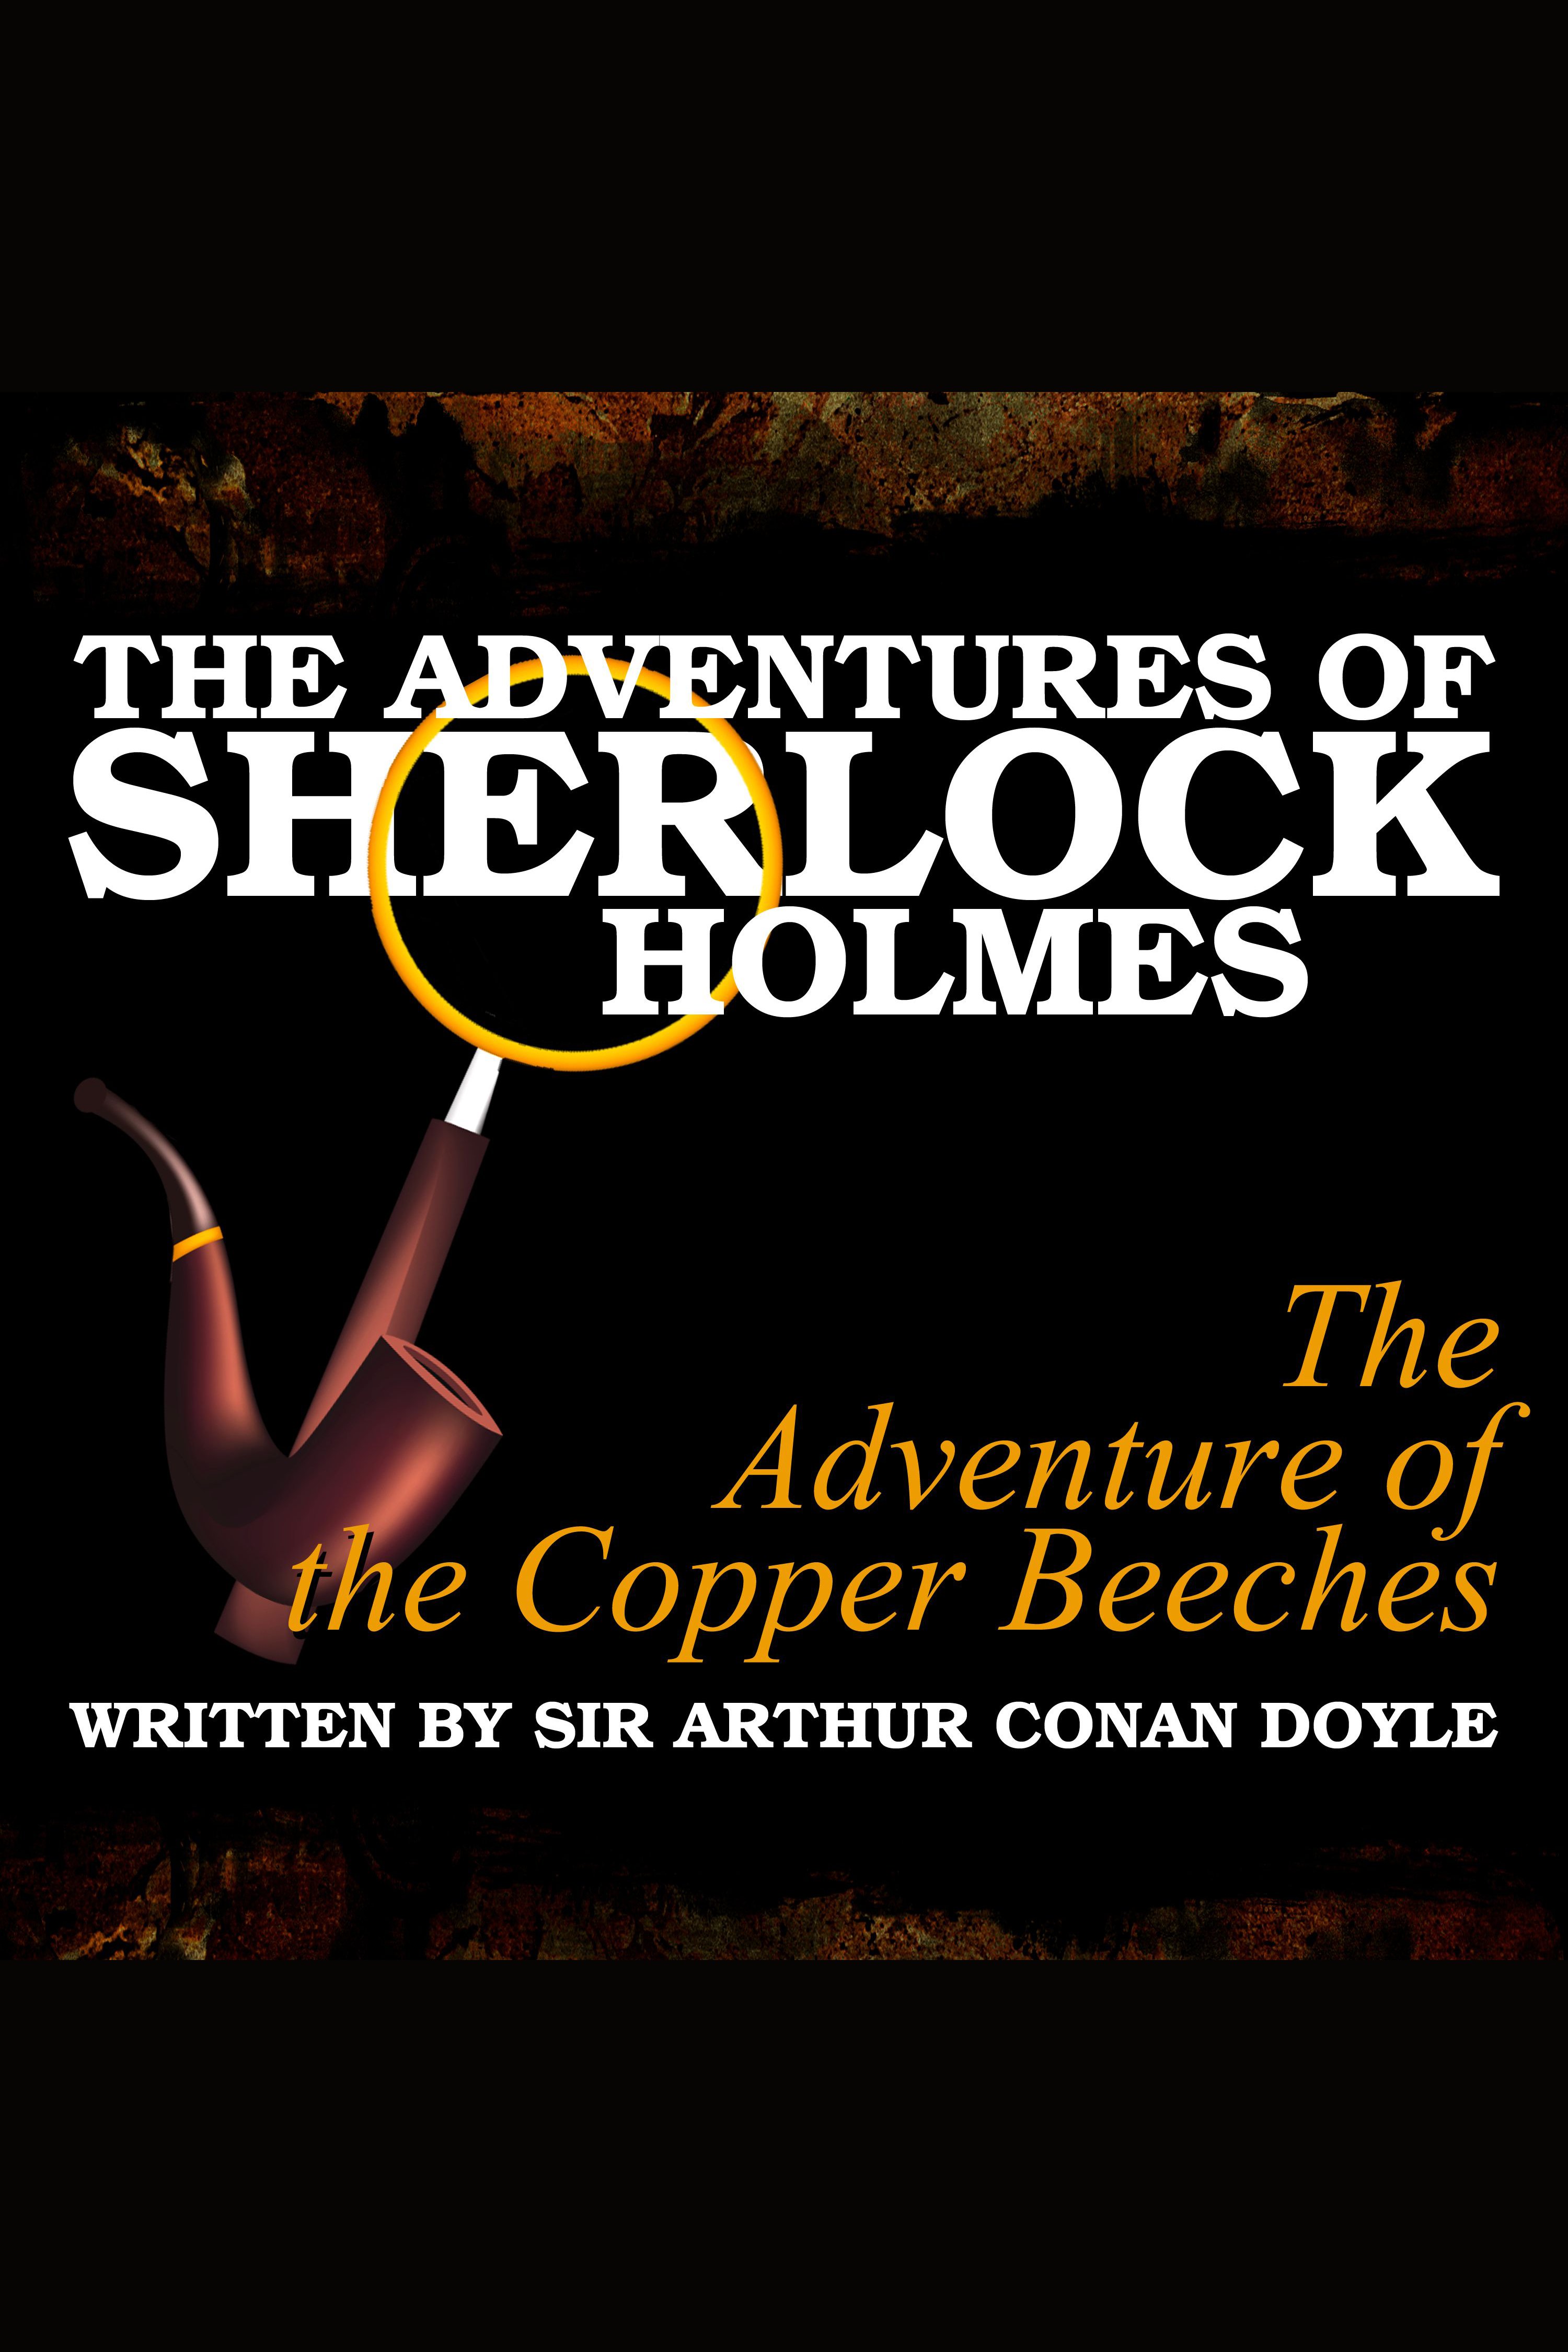 The Adventures of Sherlock Holmes - The Five Orange Pips cover image